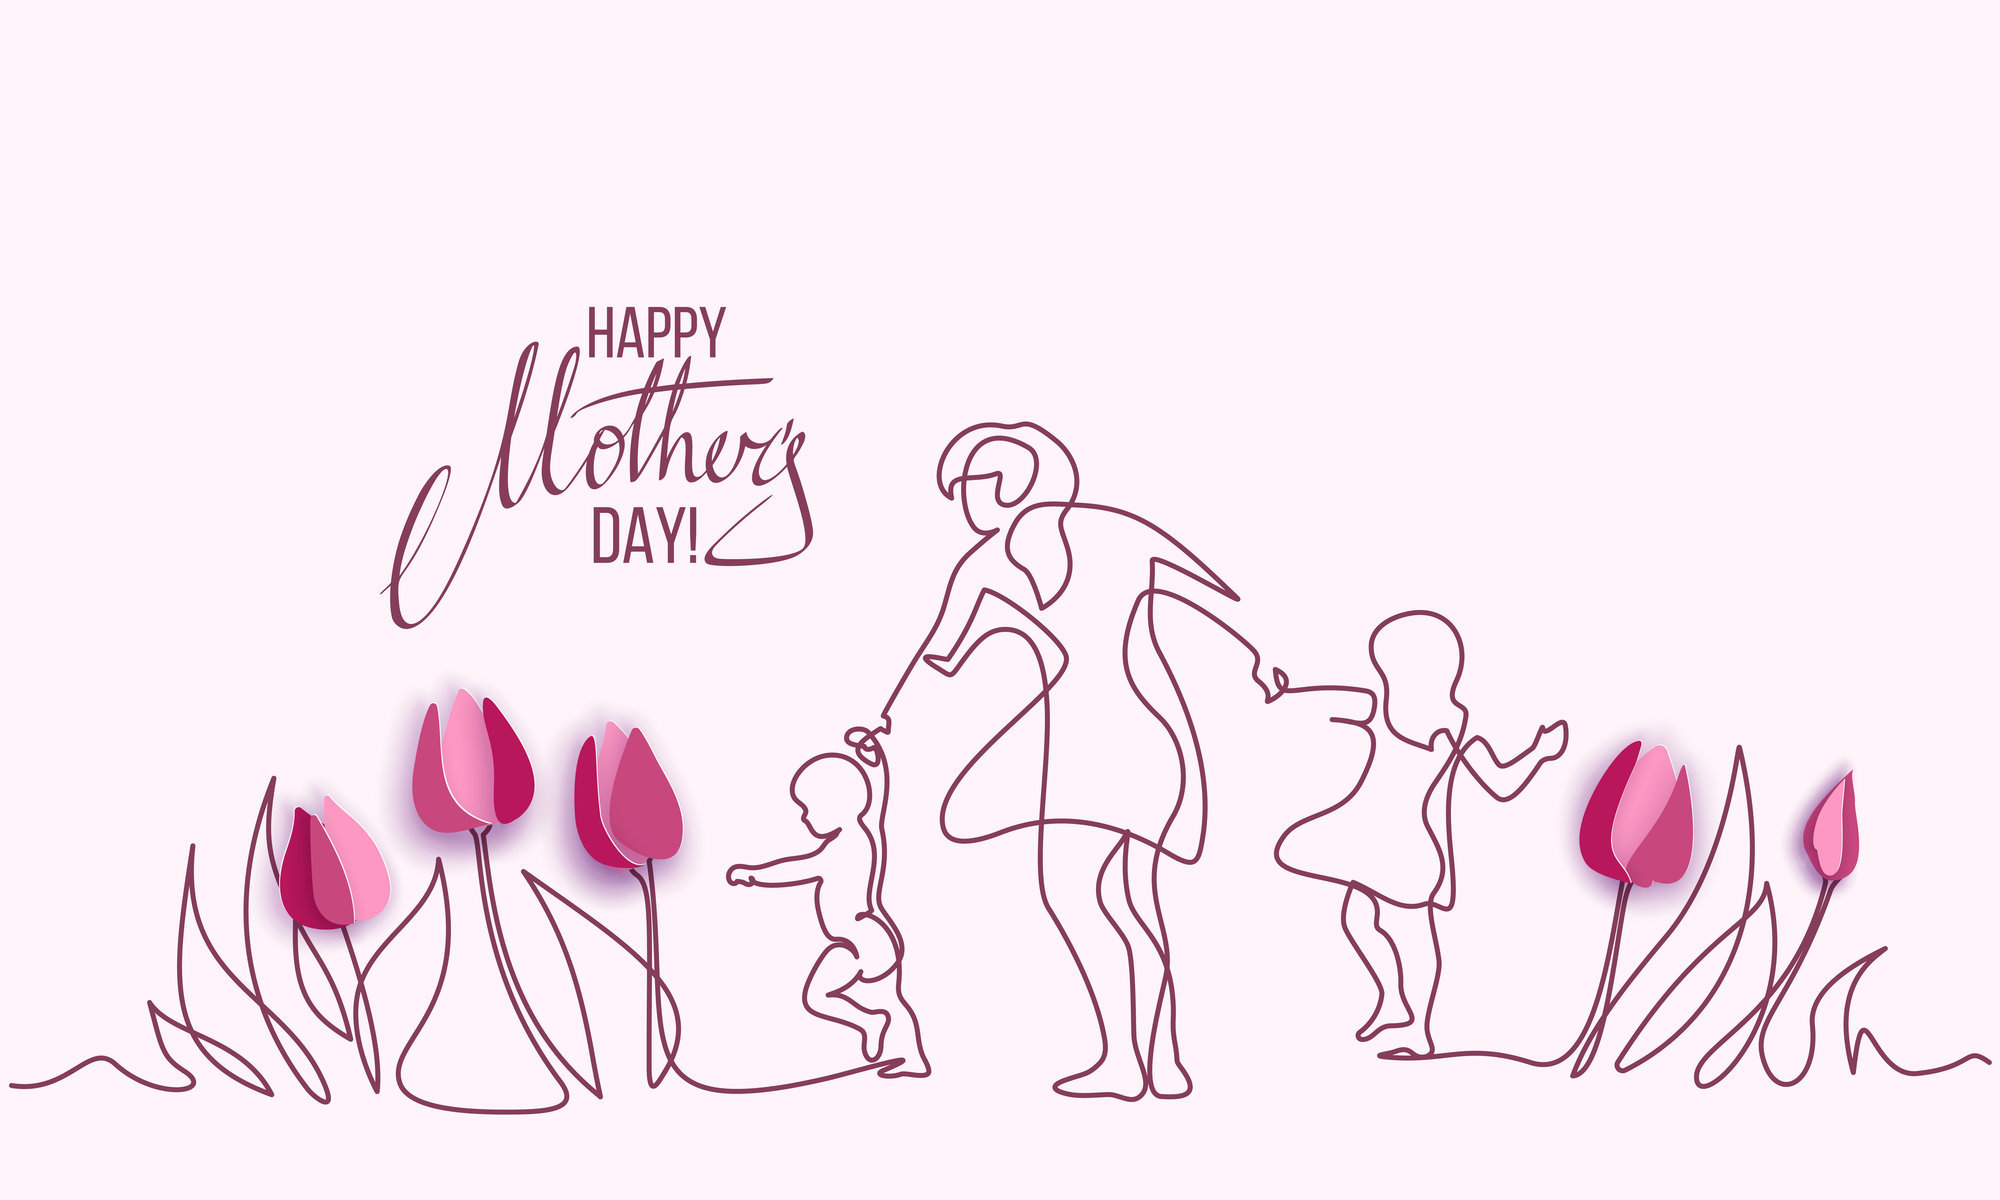 As Mother's Day approaches, it's time to honor the incredible women who have shaped our lives with love, care, and boundless strength